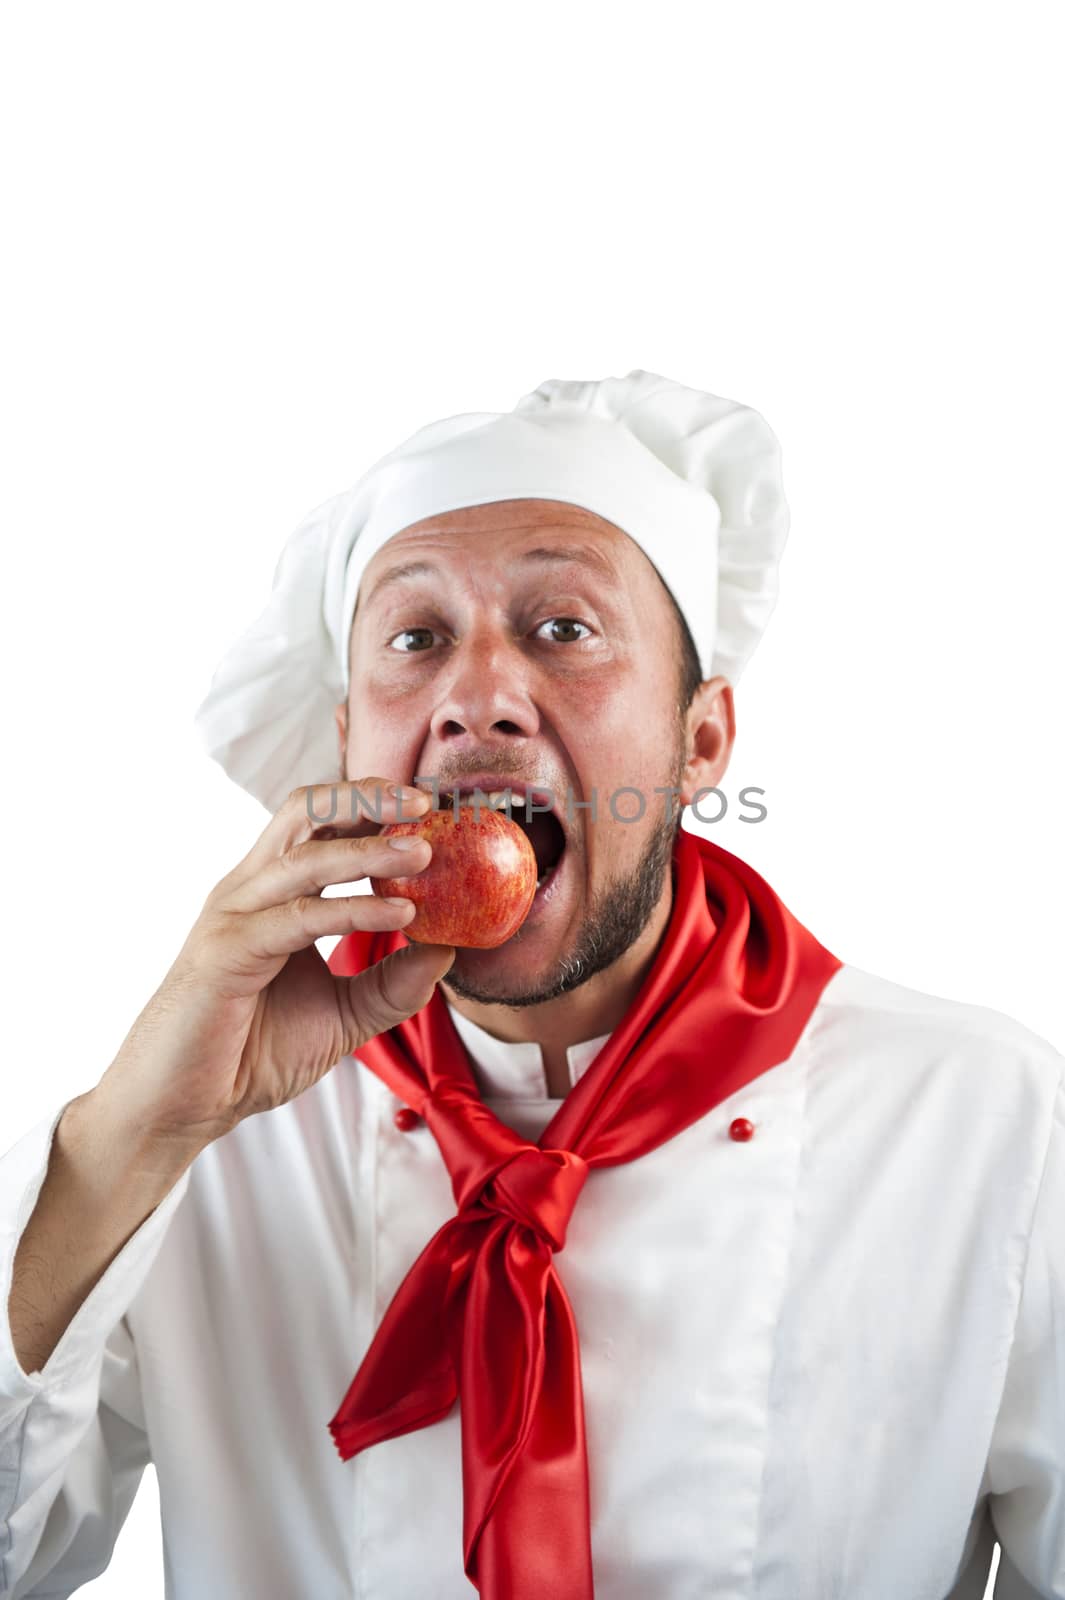 A man chef on a white background